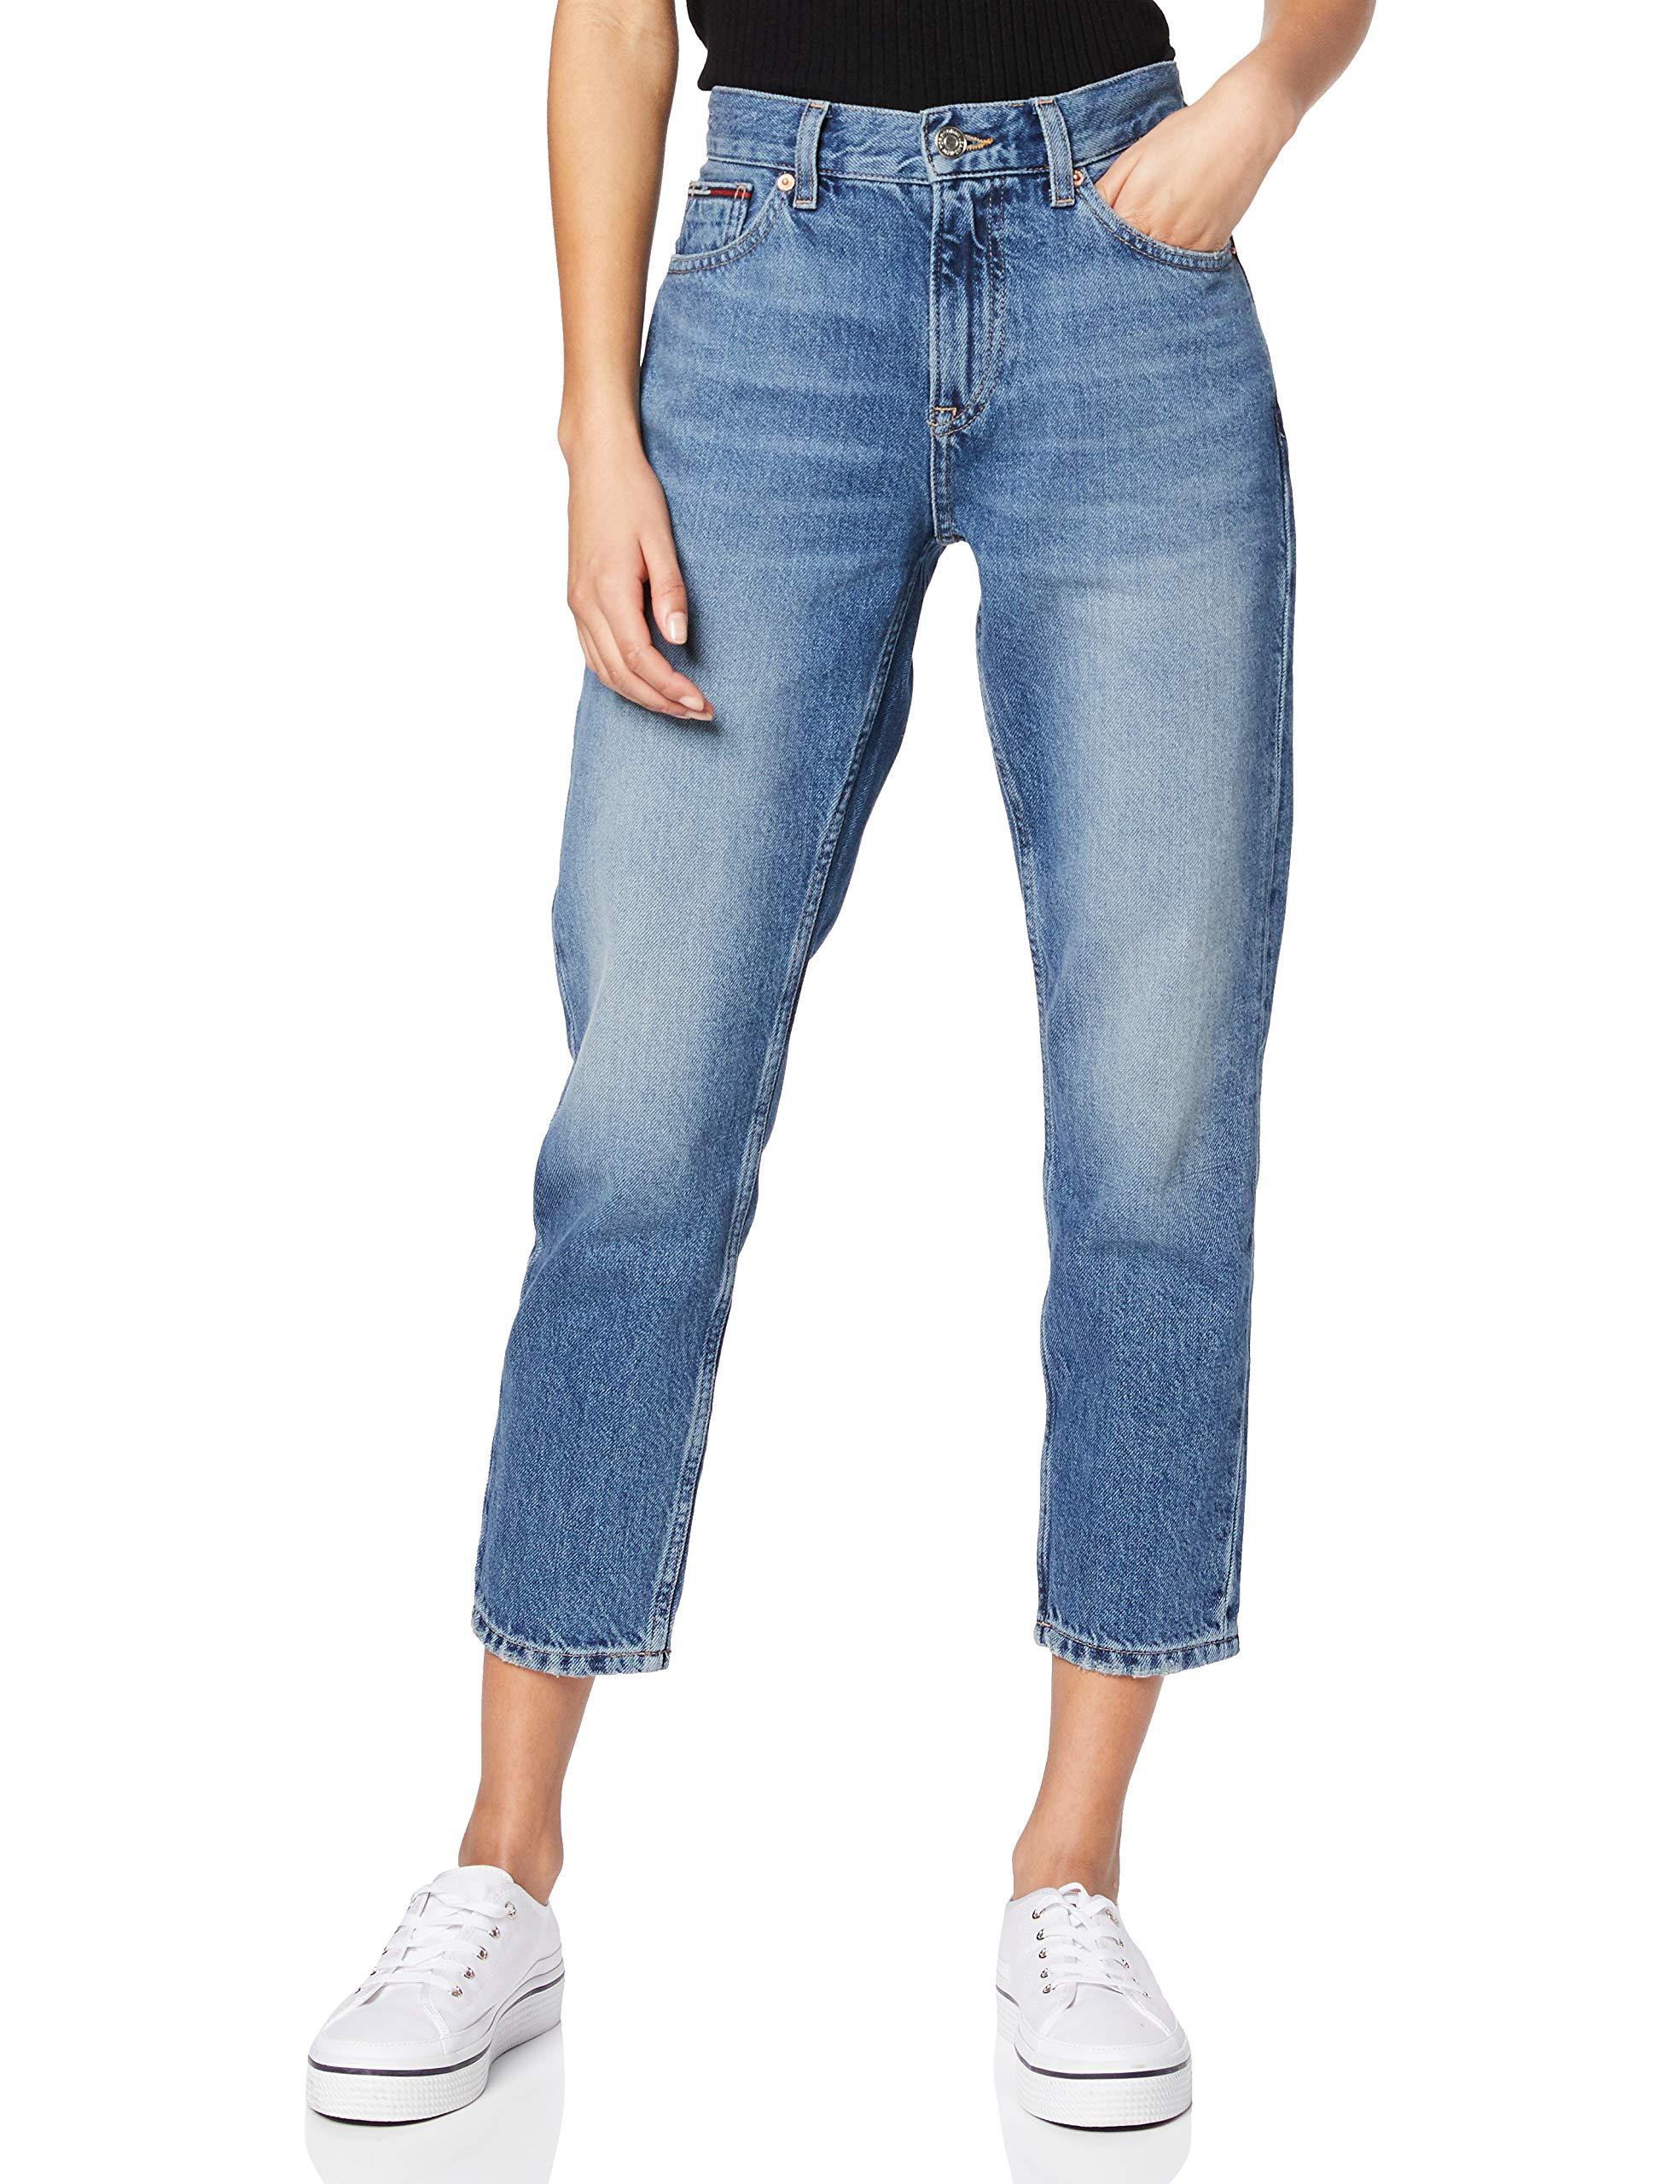 Tommy Hilfiger Izzy High Rise Slim Ankle Sndm Straight Jeans in Blau | Lyst  DE